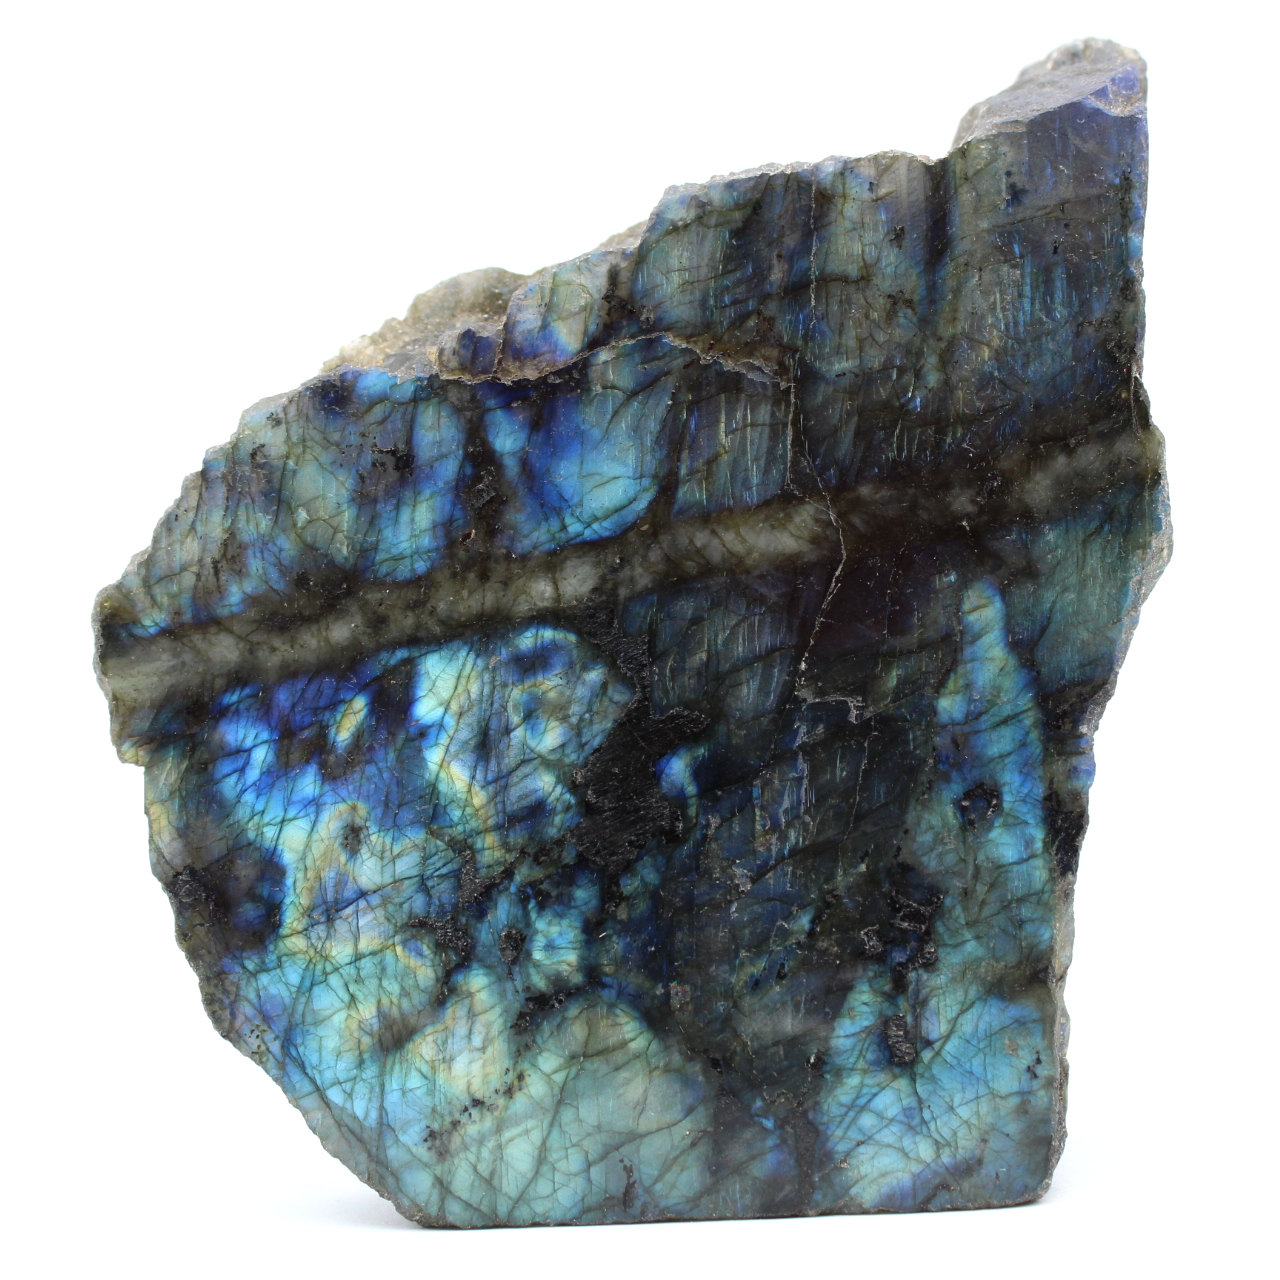 Labradorite stone with a polished face from Madagascar